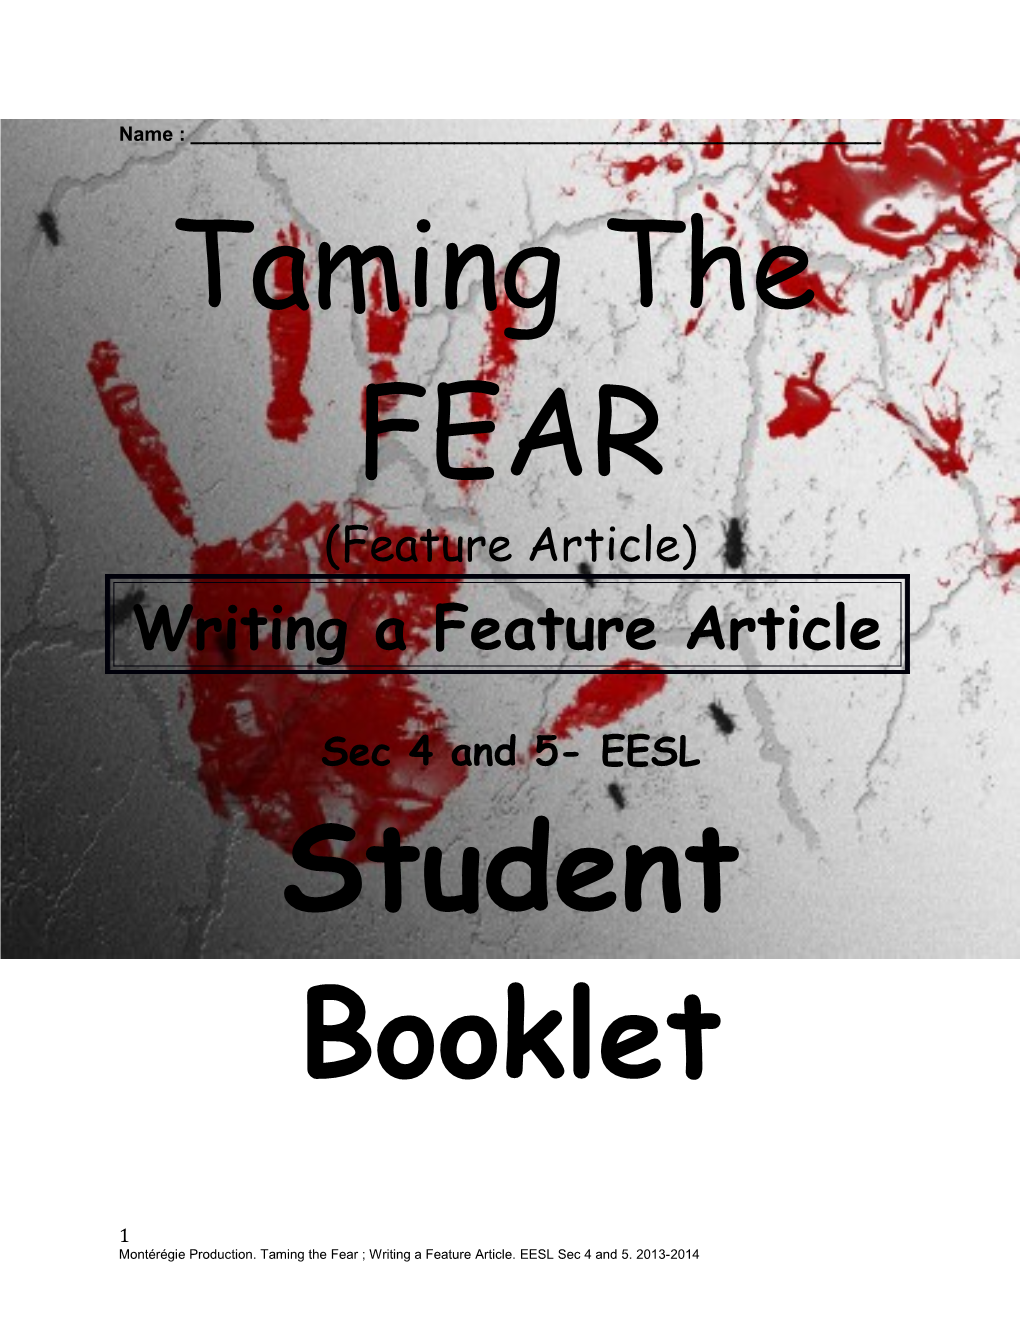 Montérégie Production. Taming the Fear ; Writing a Feature Article. EESL Sec 4 and 5. 2013-2014